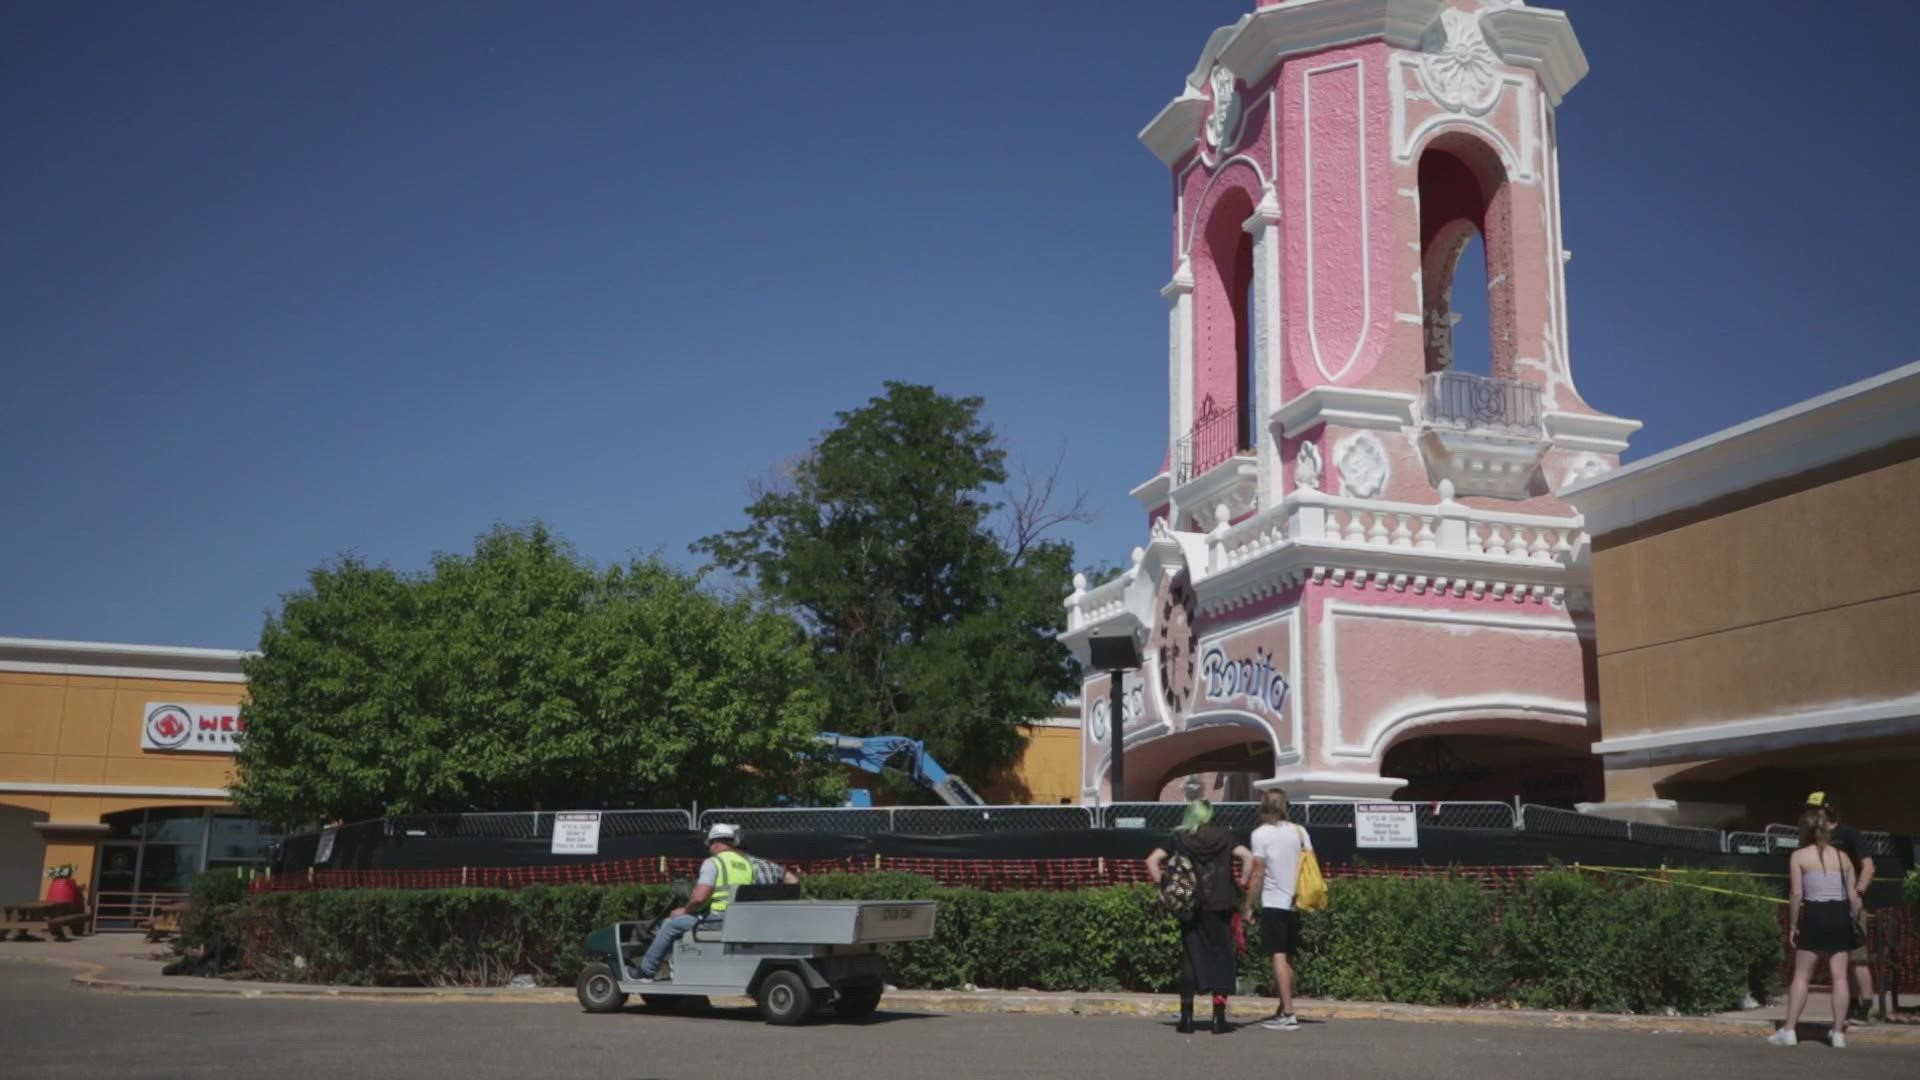 Photos obtained by 9NEWS reveal Casa Bonita as never seen before – areas gutted as work began to make it more accessible and modern.